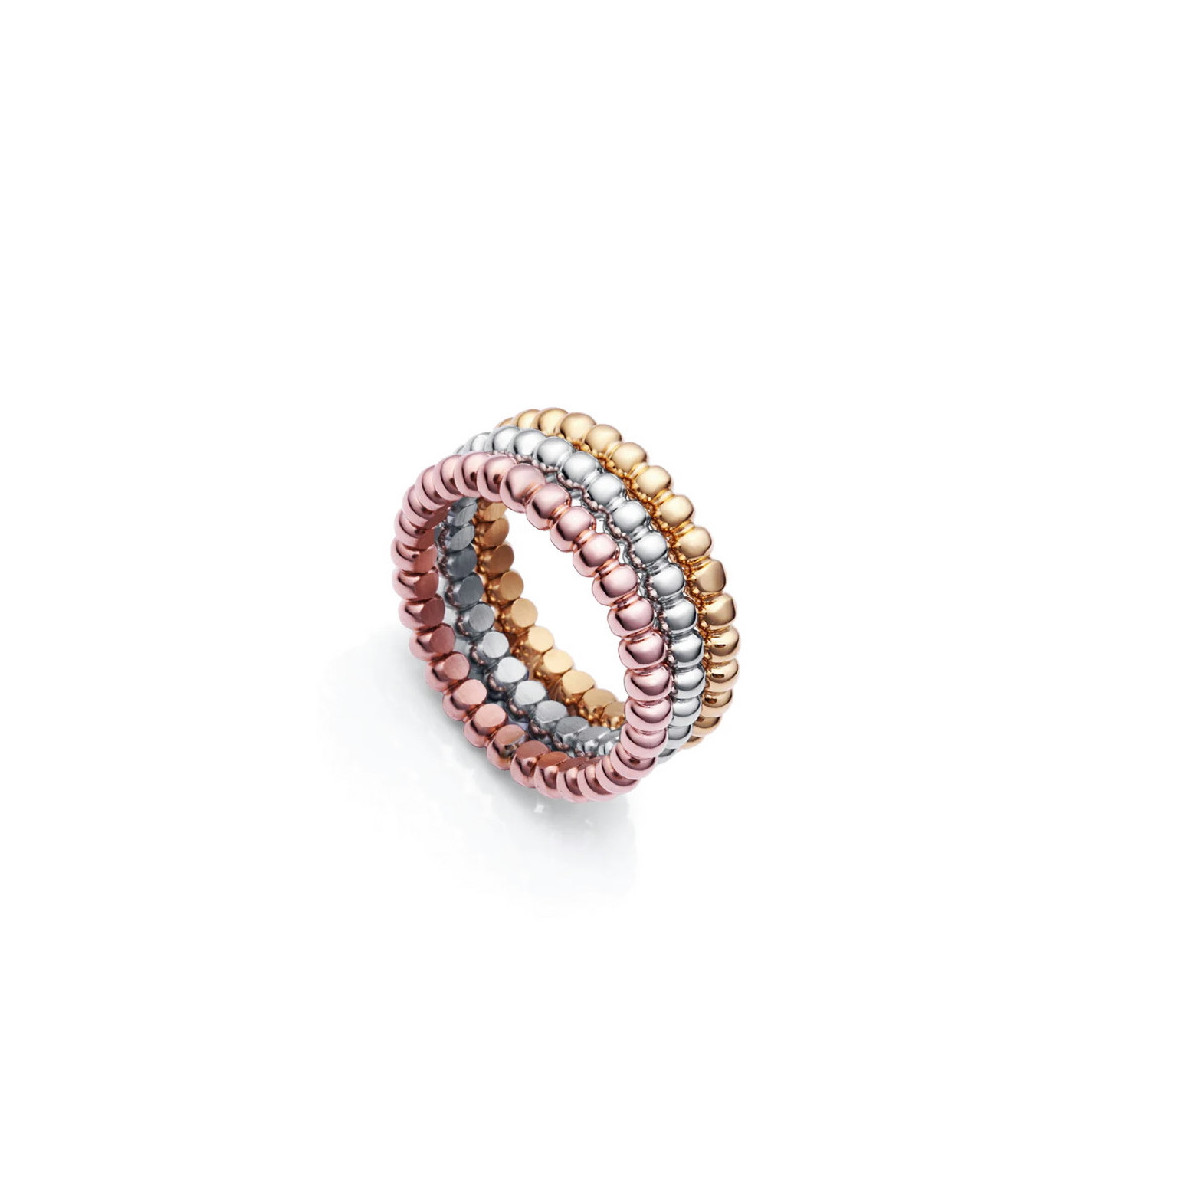 ANILLO VICEROY CHIC TRICOLOR - 1451A01619